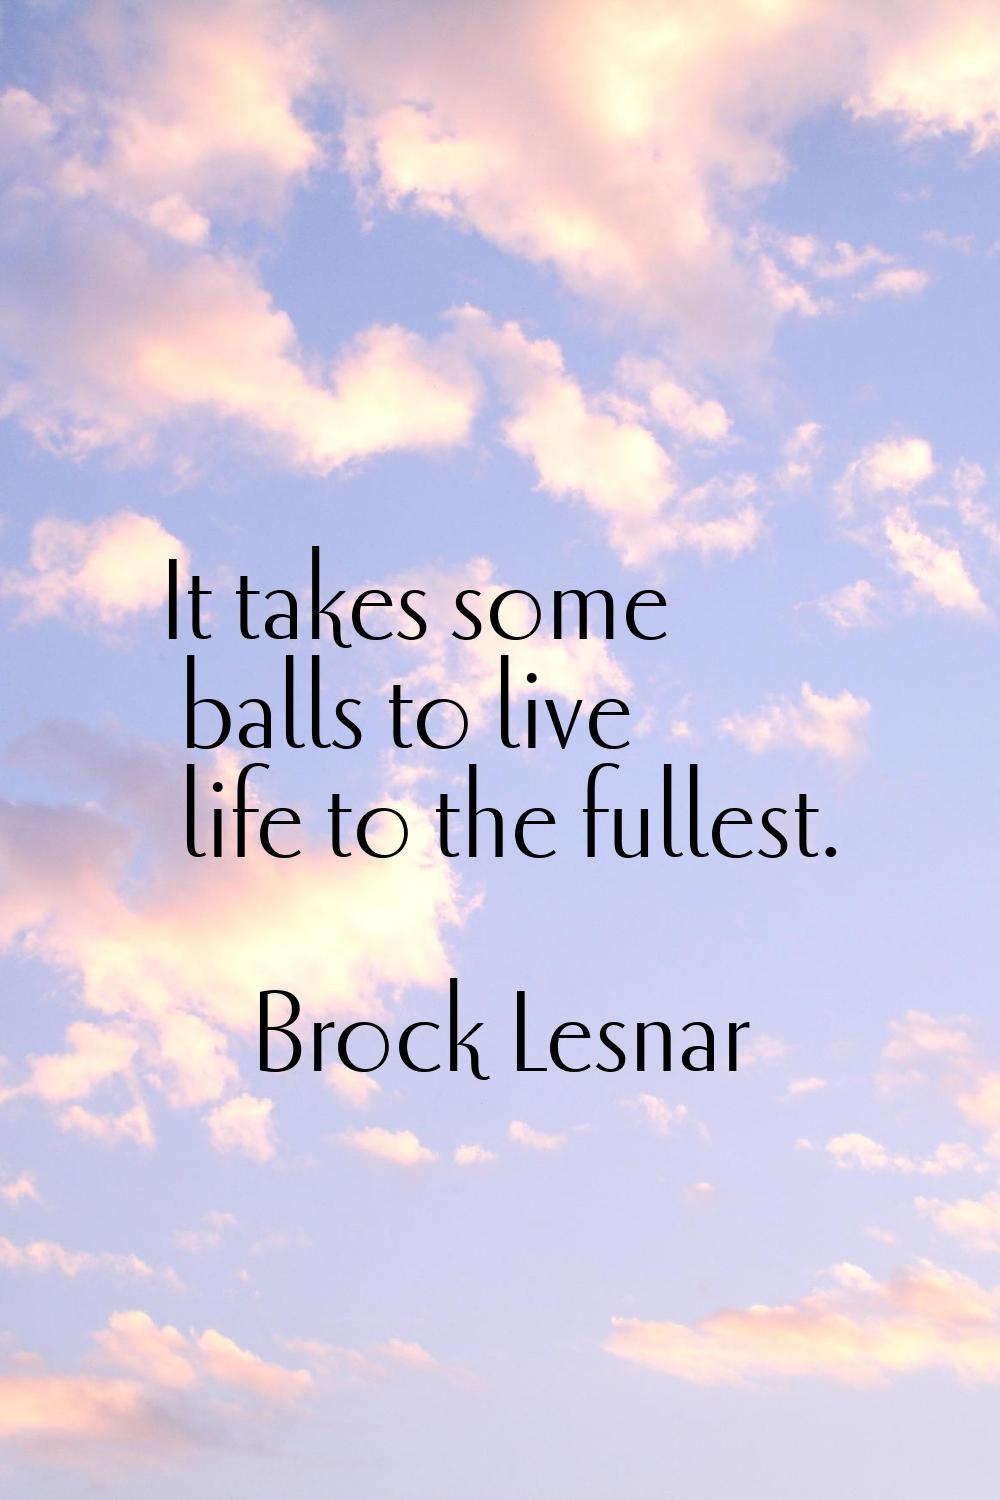 It takes some balls to live life to the fullest.